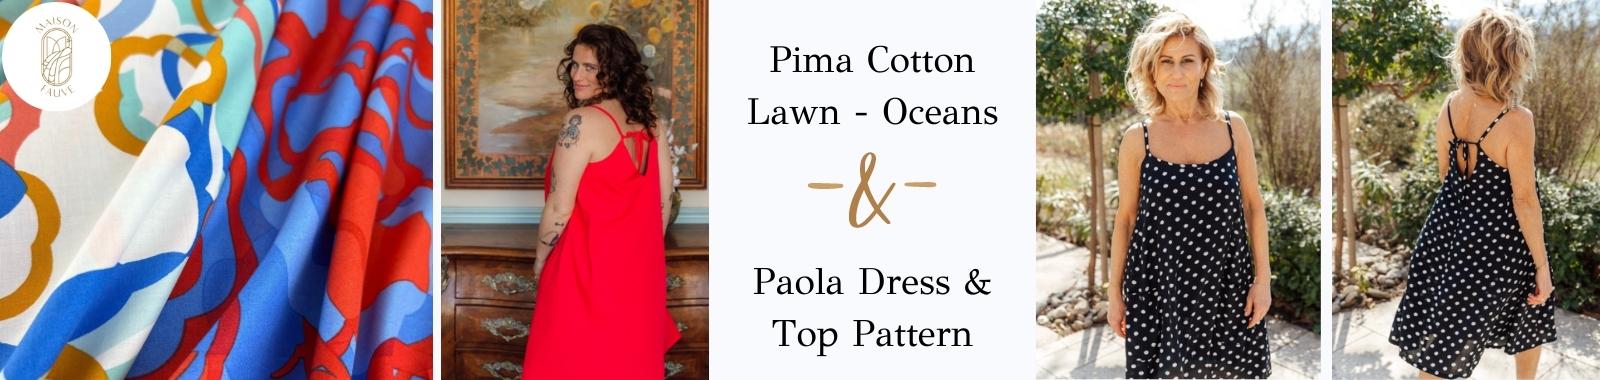 Oceans_And_Paola_Dress_Top_Pattern